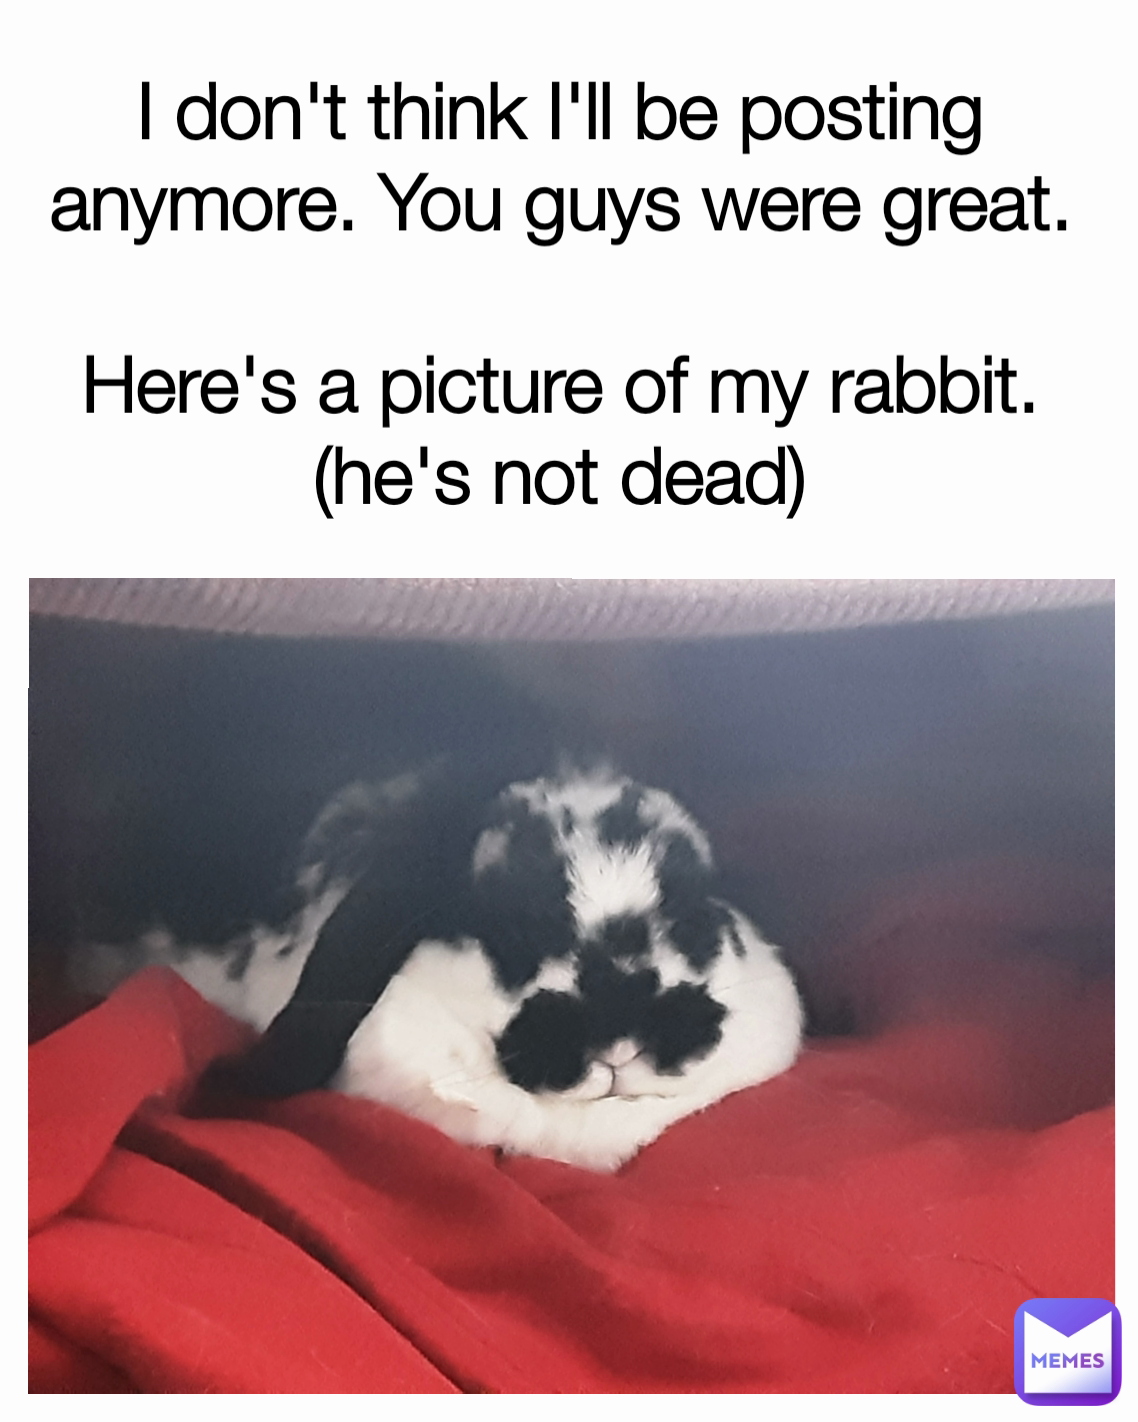 I don't think I'll be posting anymore. You guys were great.

Here's a picture of my rabbit. (he's not dead)